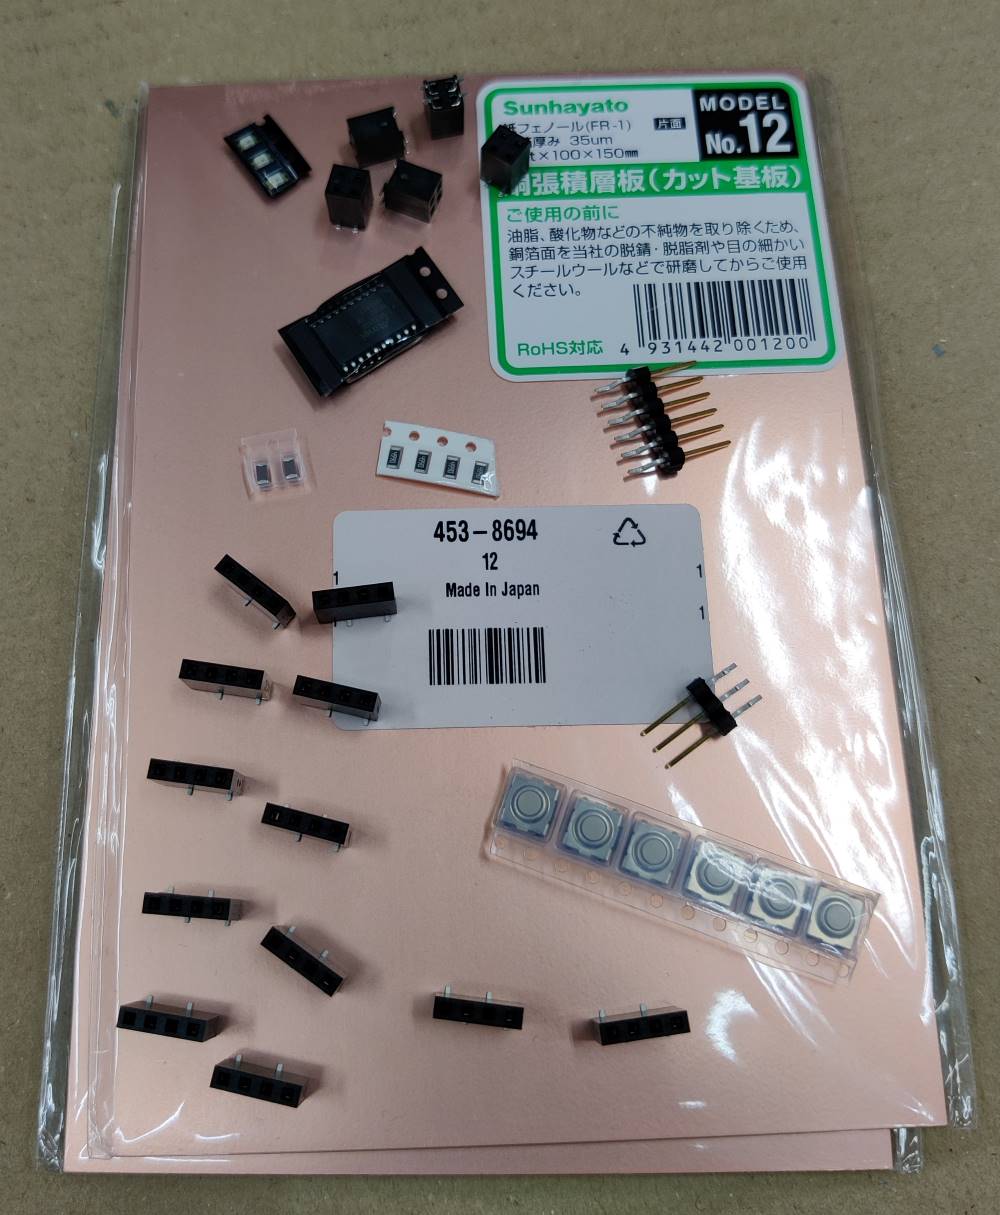 Initial PCB stock and components